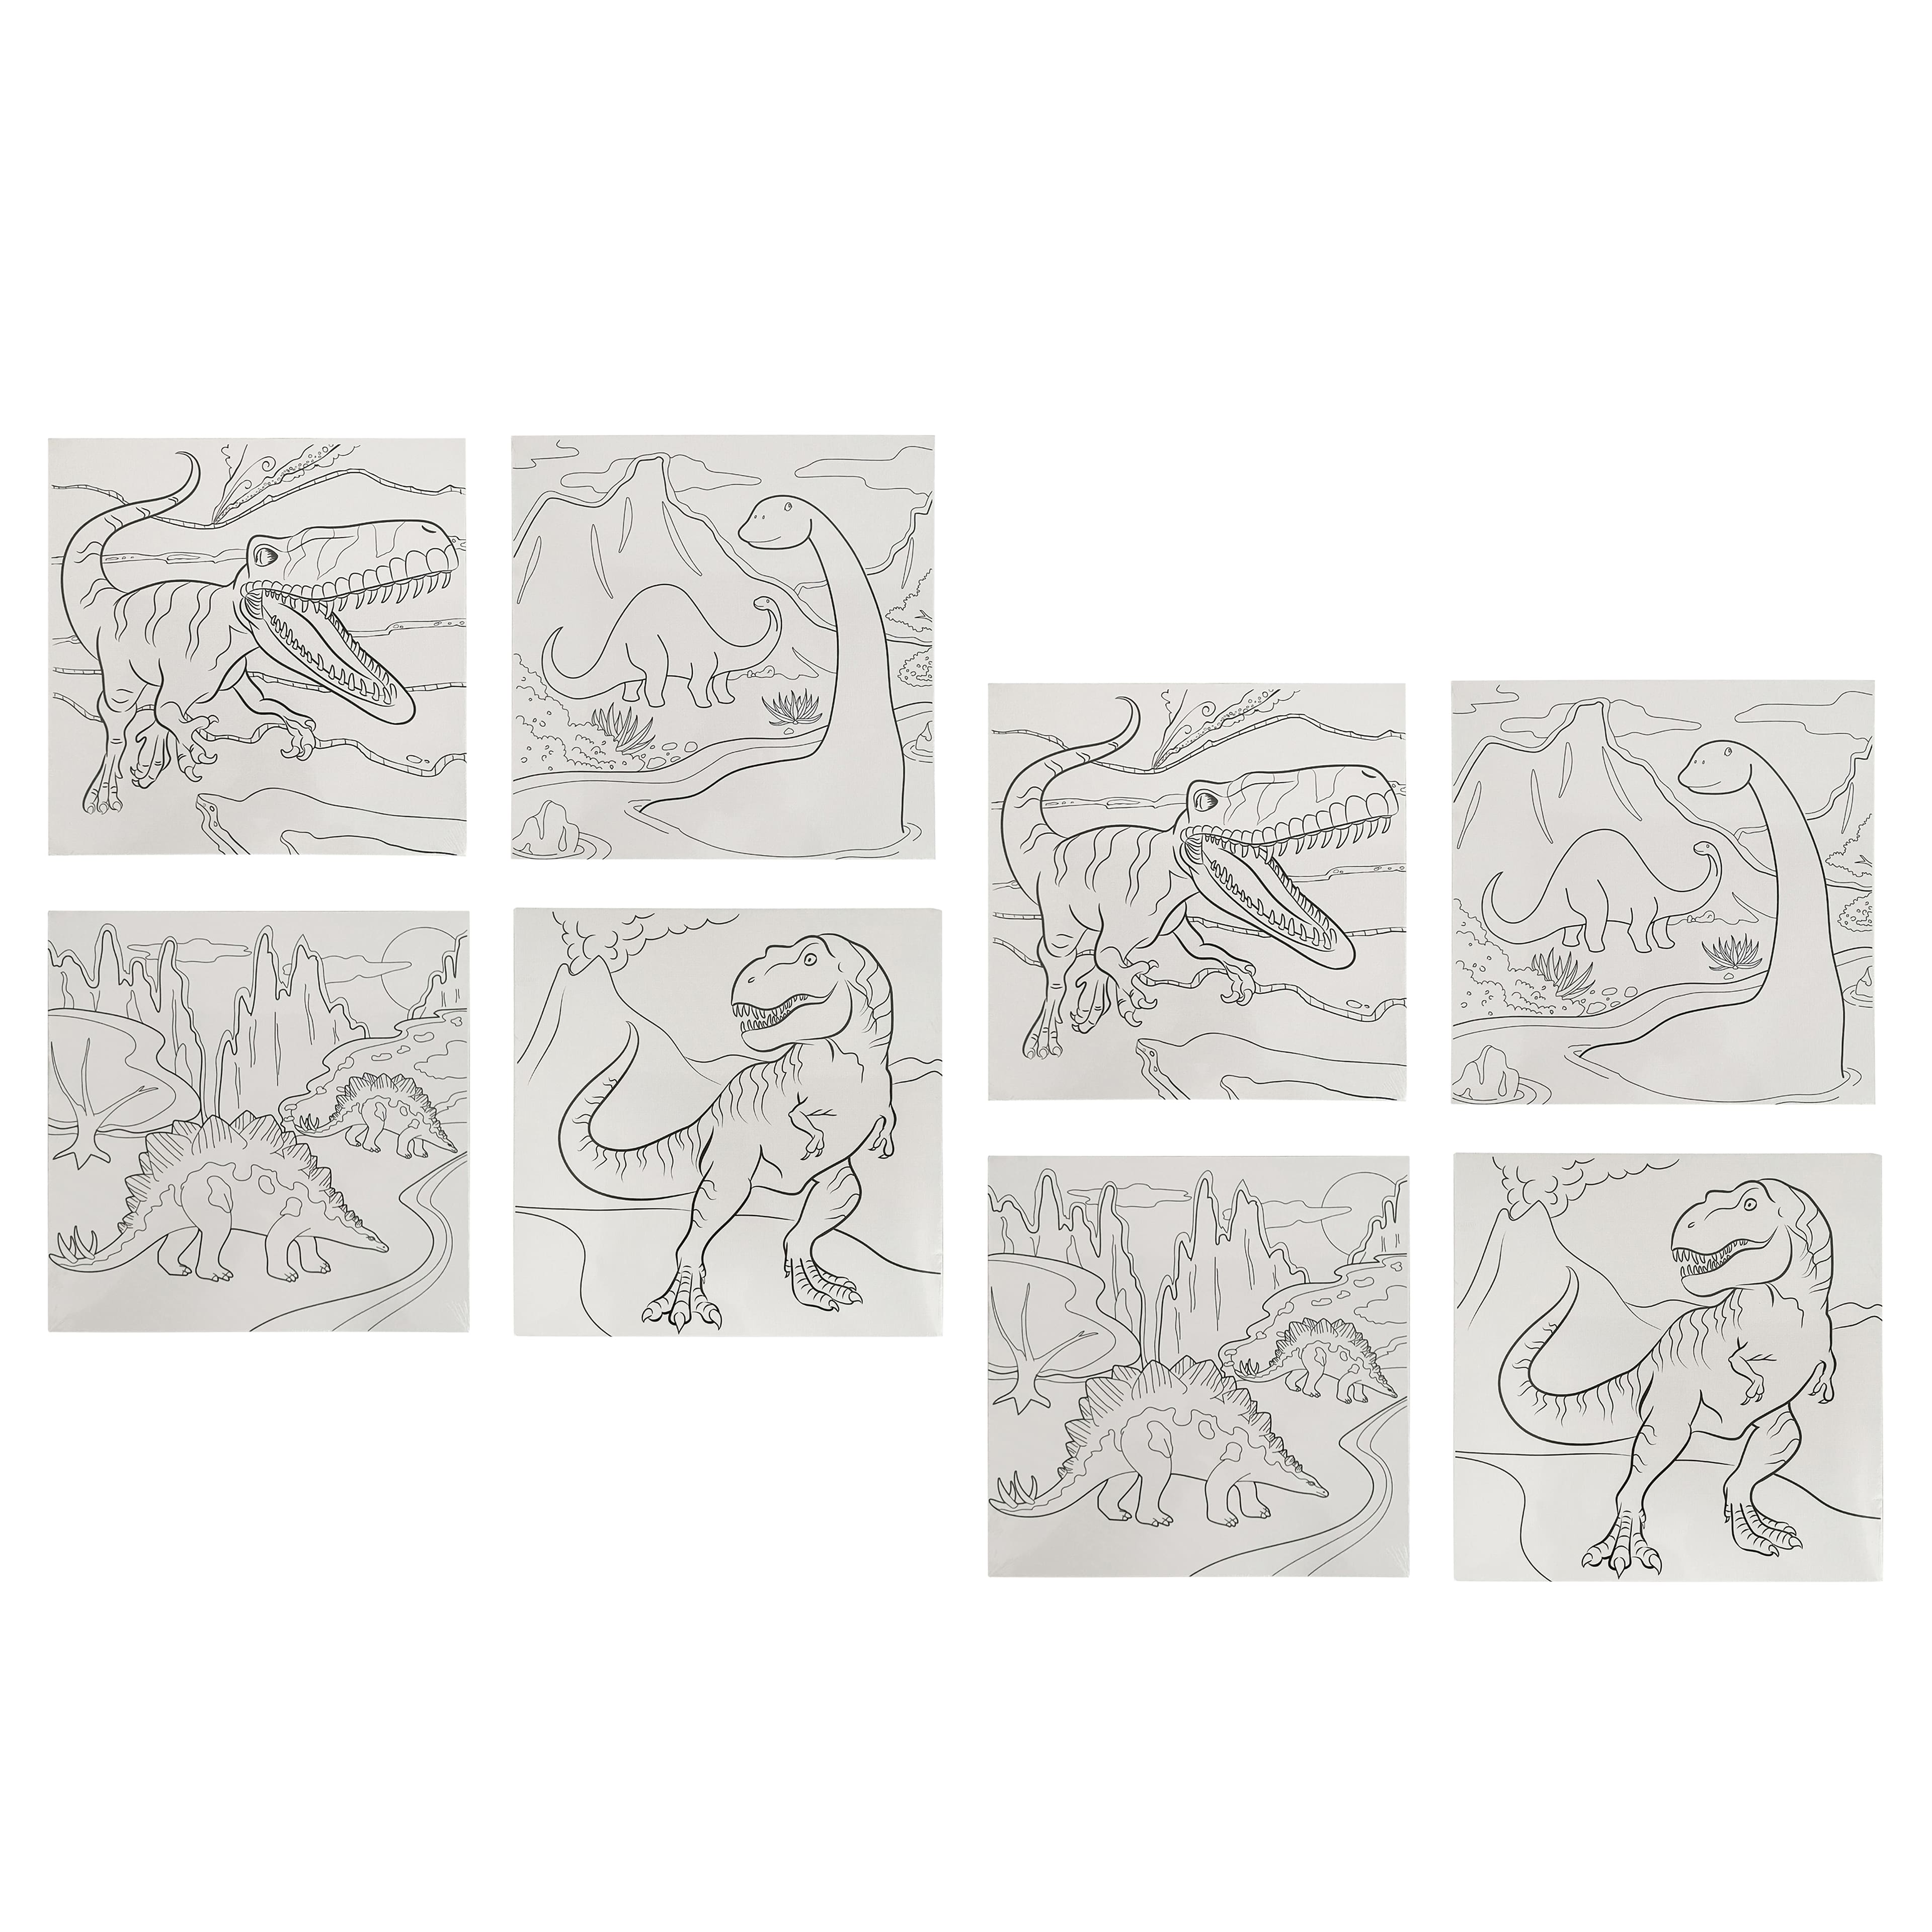 6 Packs: 8 ct. (48 total) Dinosaur Canvas Set by Creatology&#x2122;